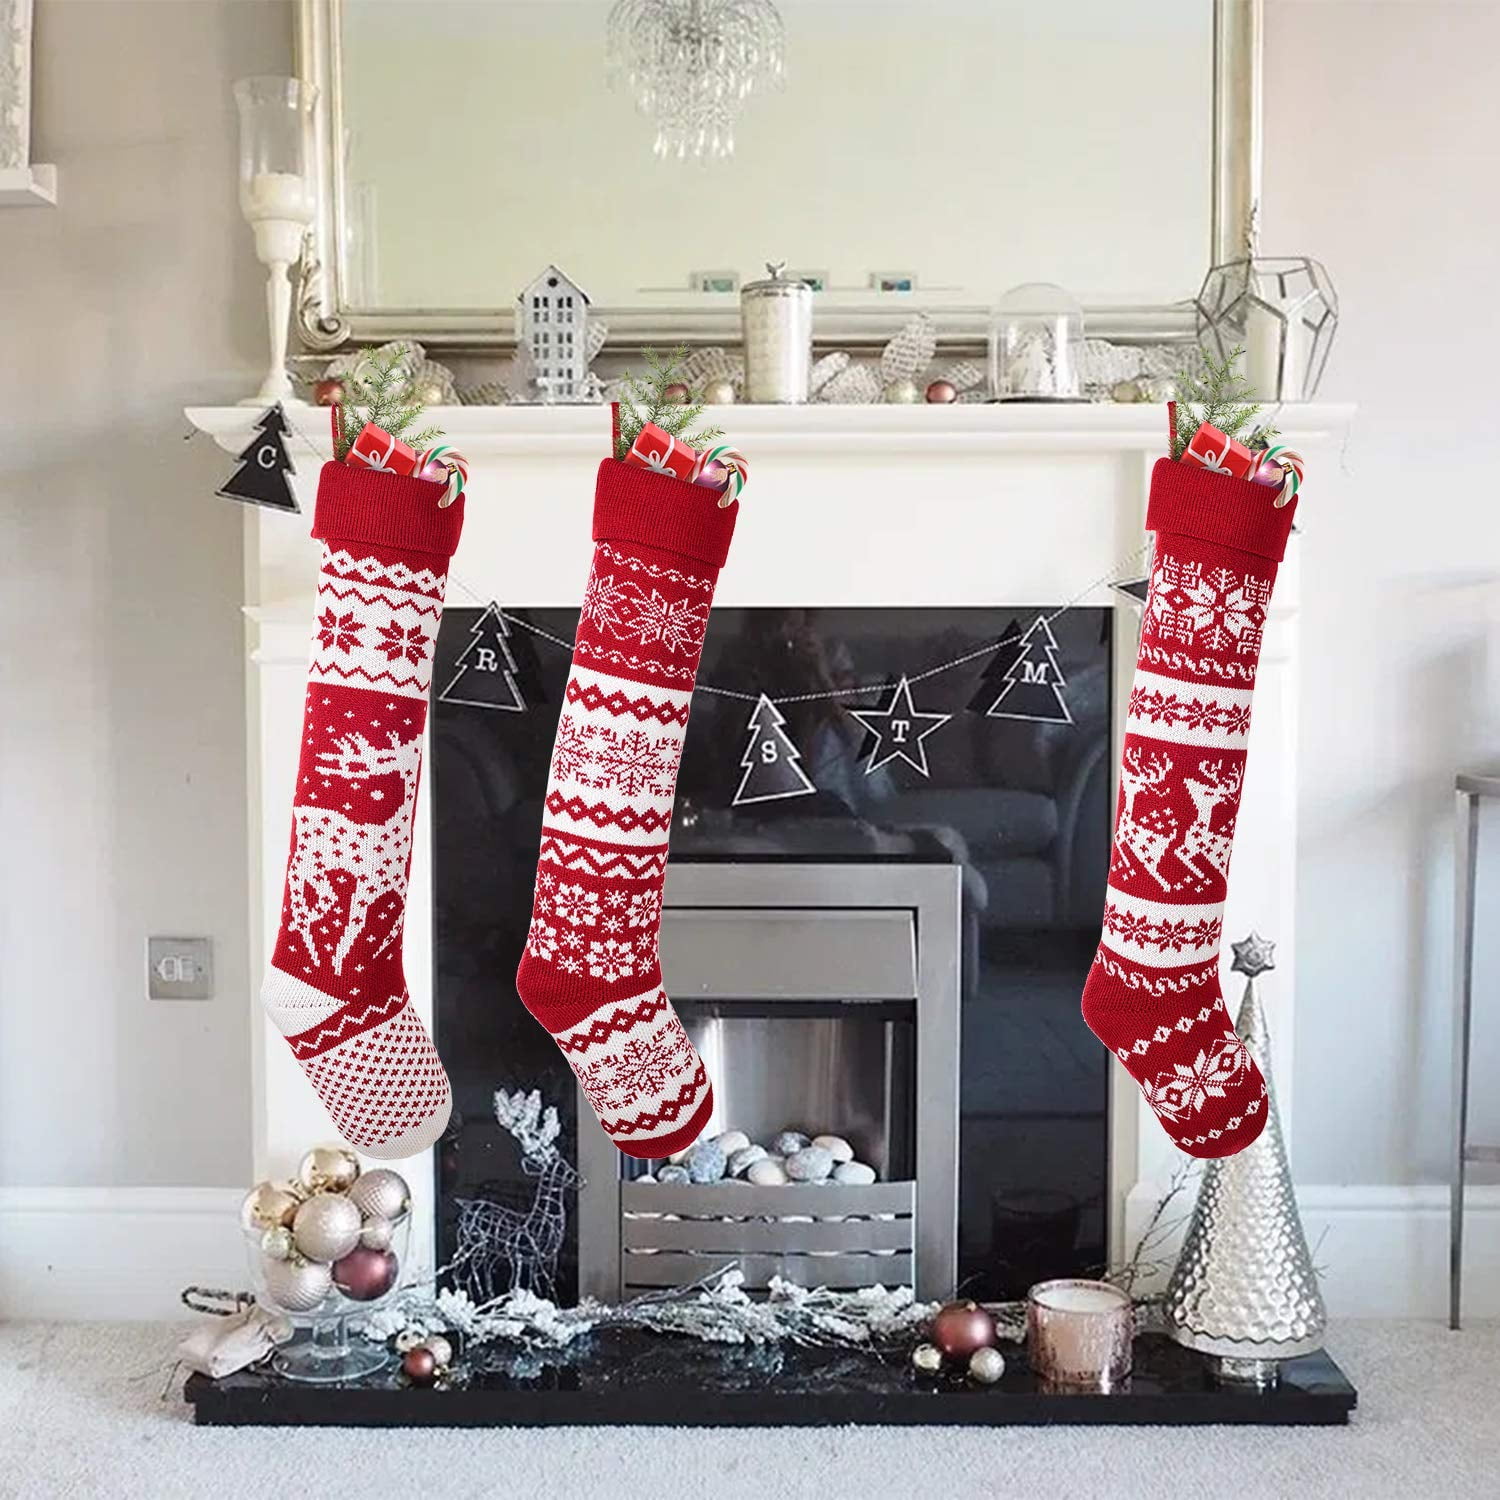  Fireplace Christmas Stockings Christmas Classic with Large  Christmas Stockings Decorations Stockings Hanging Indoor Christmas Knitted  Gifts Home Vintage Stained Glass Sun Catchers (White, One Size) : Home &  Kitchen